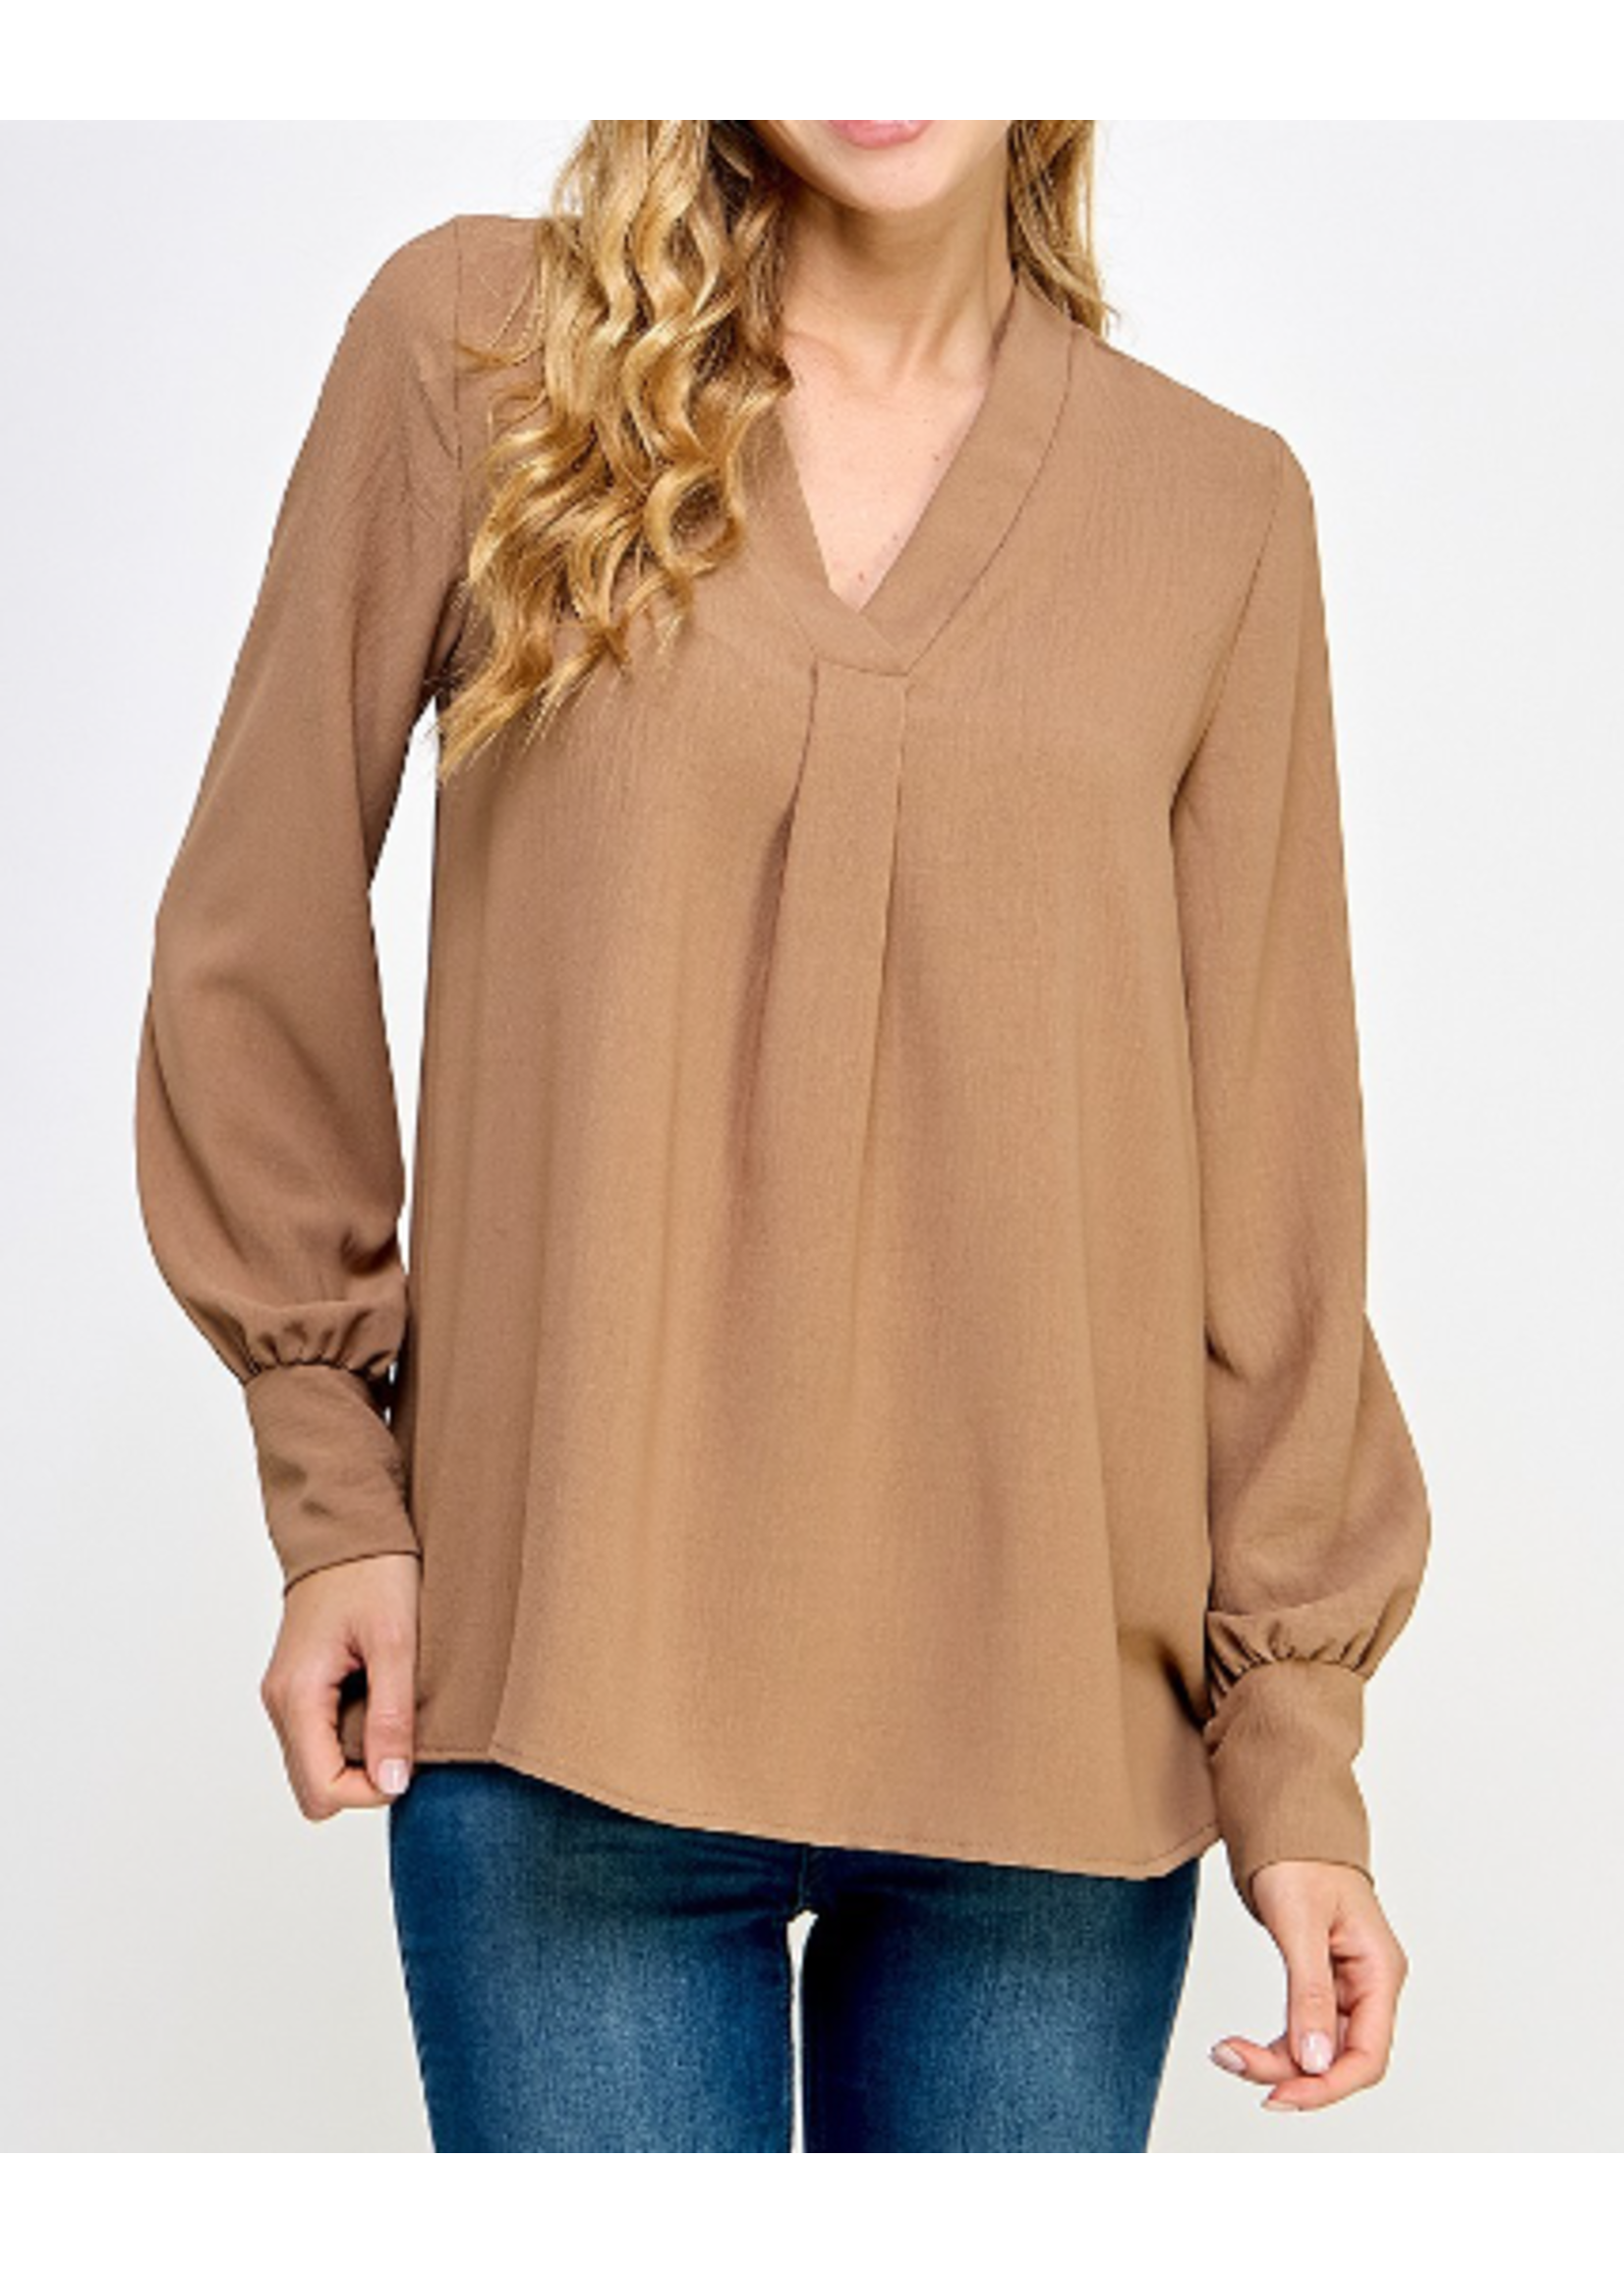 2DT3891 - SOLIVE VNECK BLOUSE W CUFFED LONG SLEEVE CROSSOVER NECKLINE